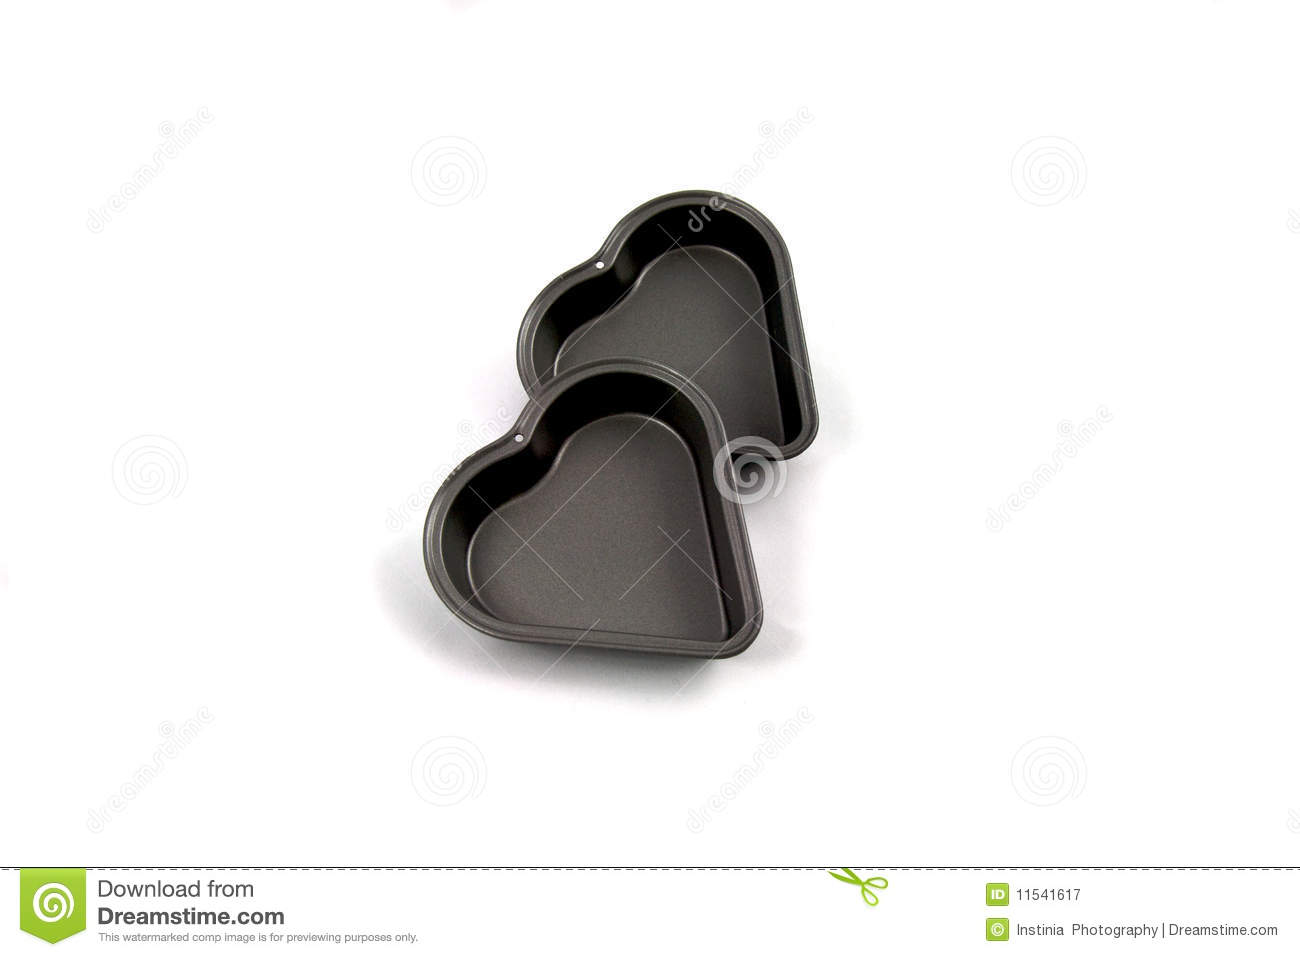 Free Stock Photography  Baking Two Heart Tart Tins Kitchen Related